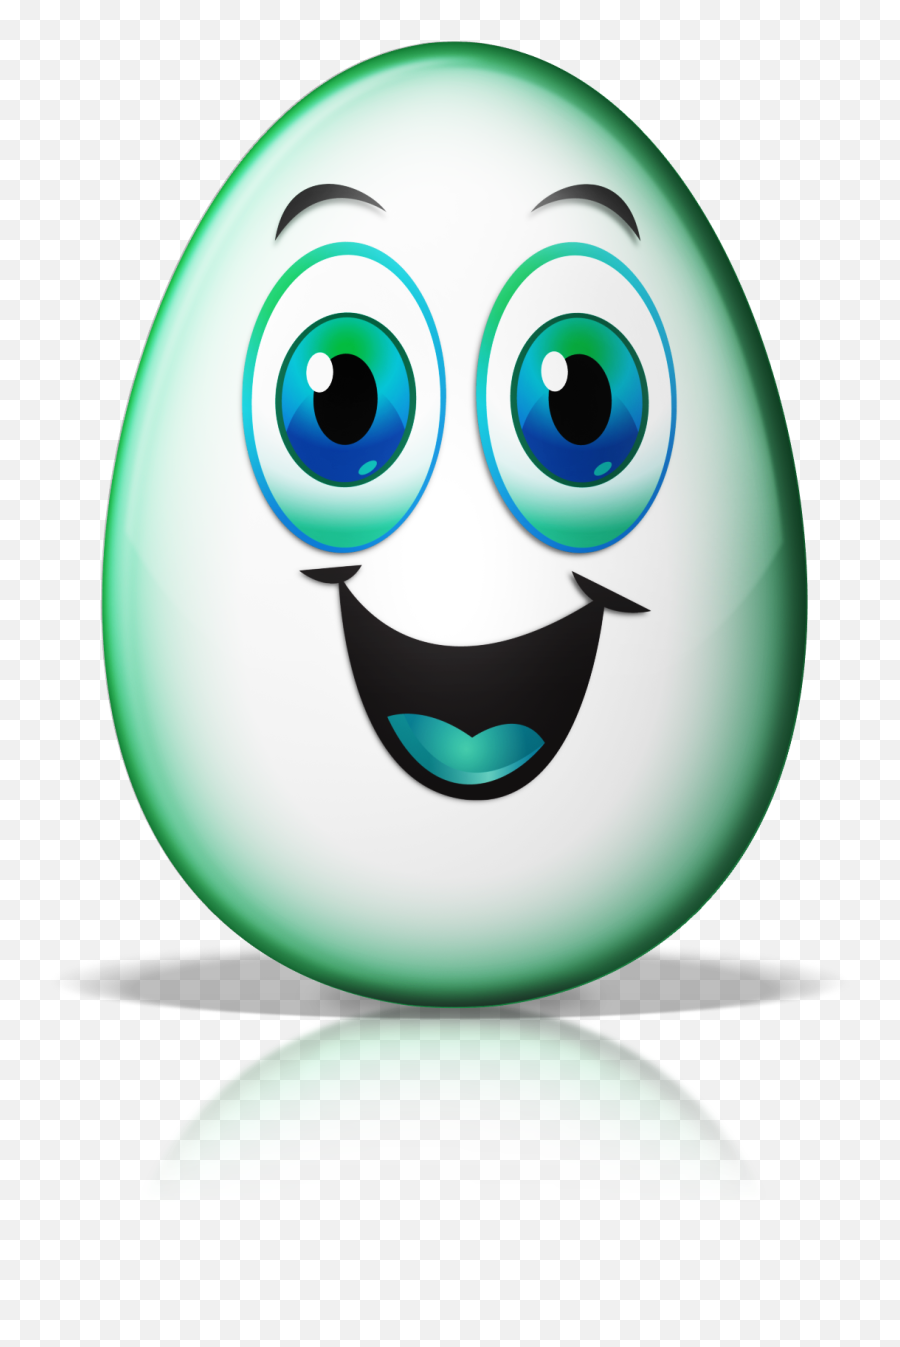 Layer And Edit - Egg With Face Animated Emoji,Emoticon Explanations